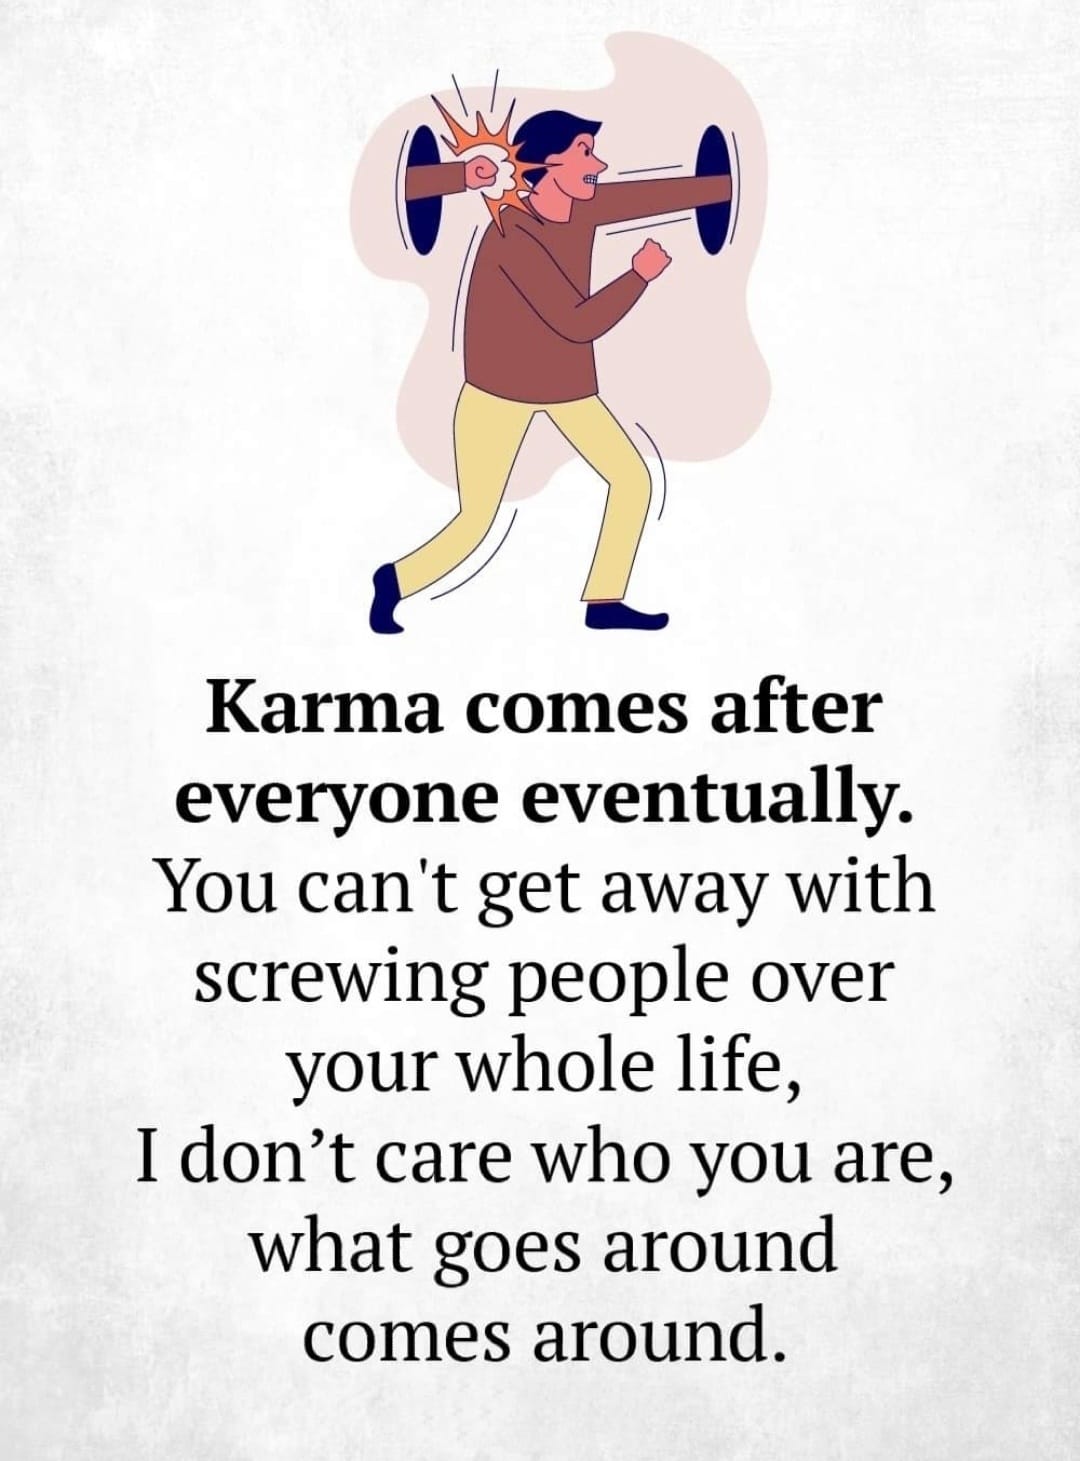 Karma comes after everyone eventually, You can't get away with screwing people over